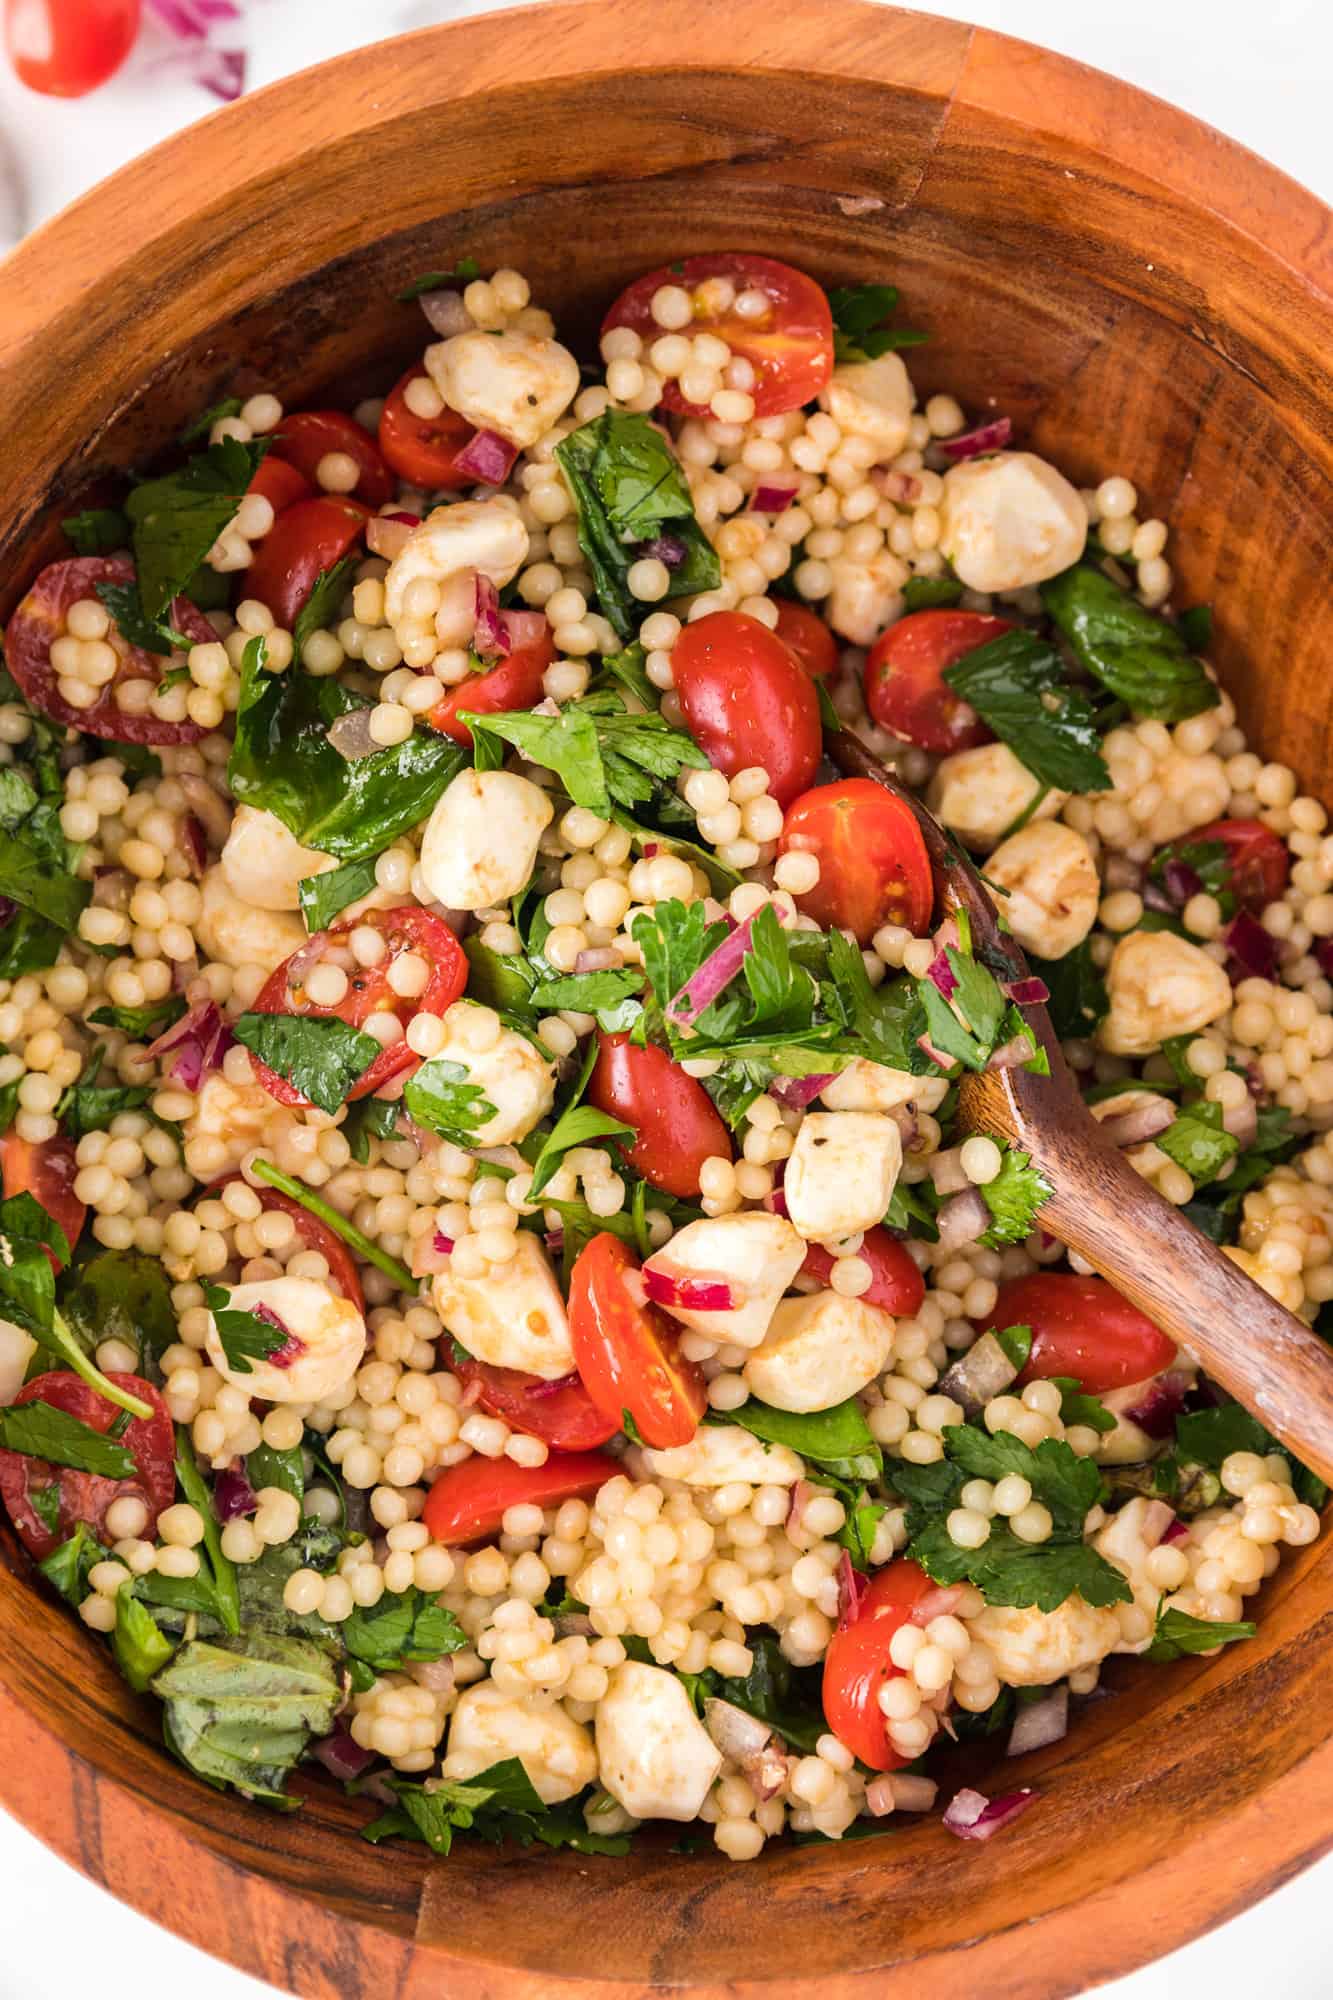 Couscous salad with herbs, tomatoes, mozzarella, in a large wooden bowl.